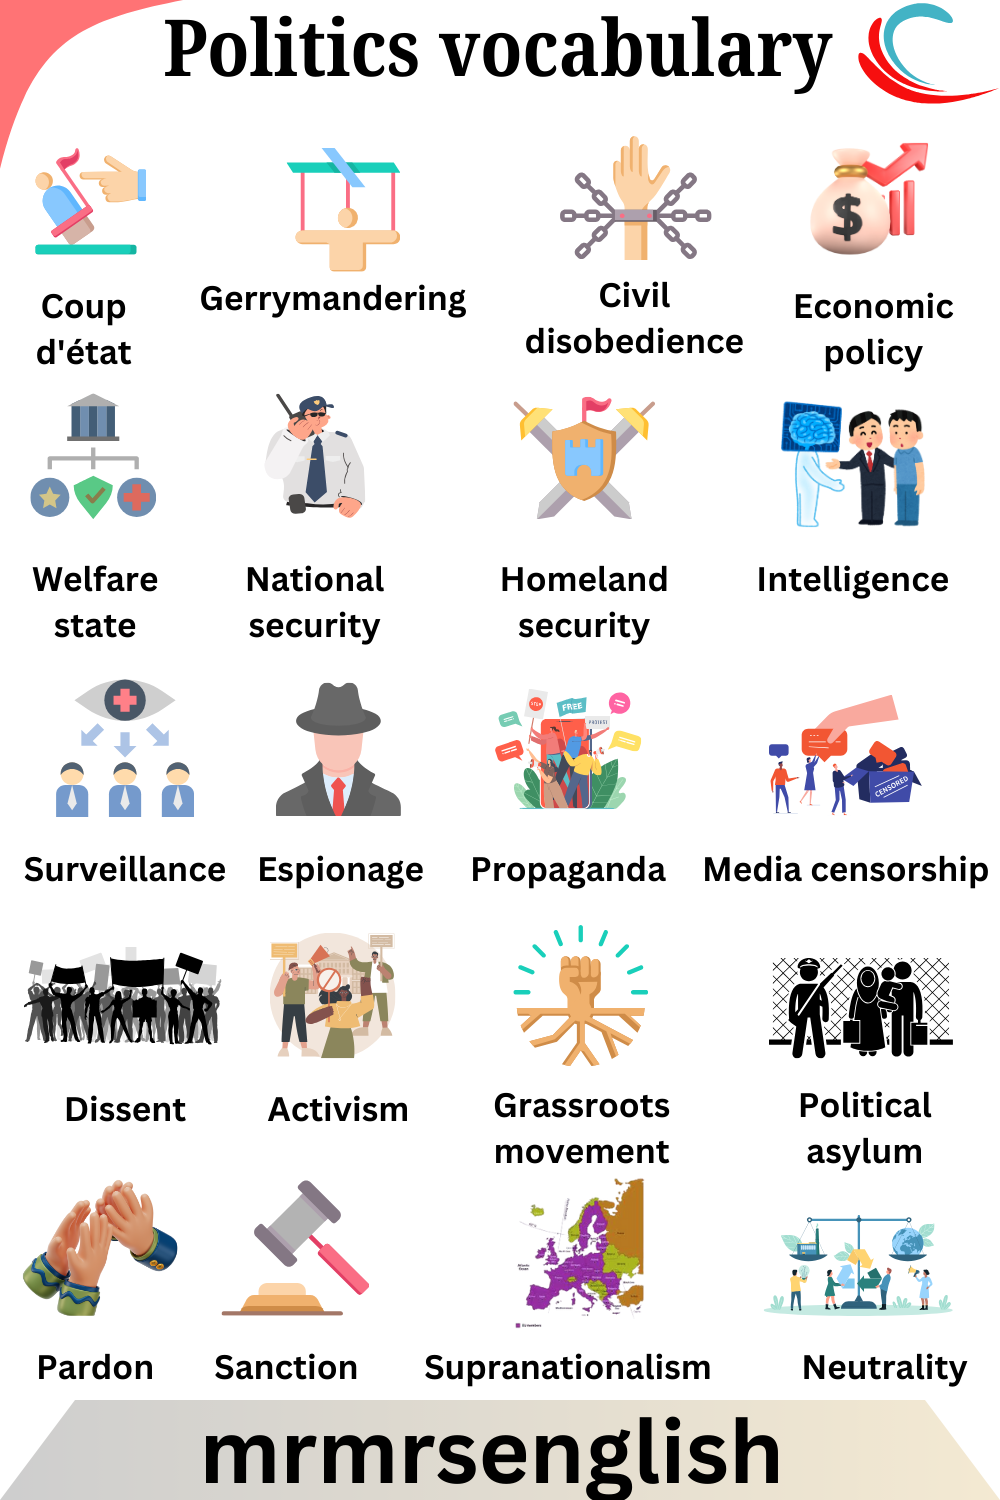 Politics Related vocabulary words in English